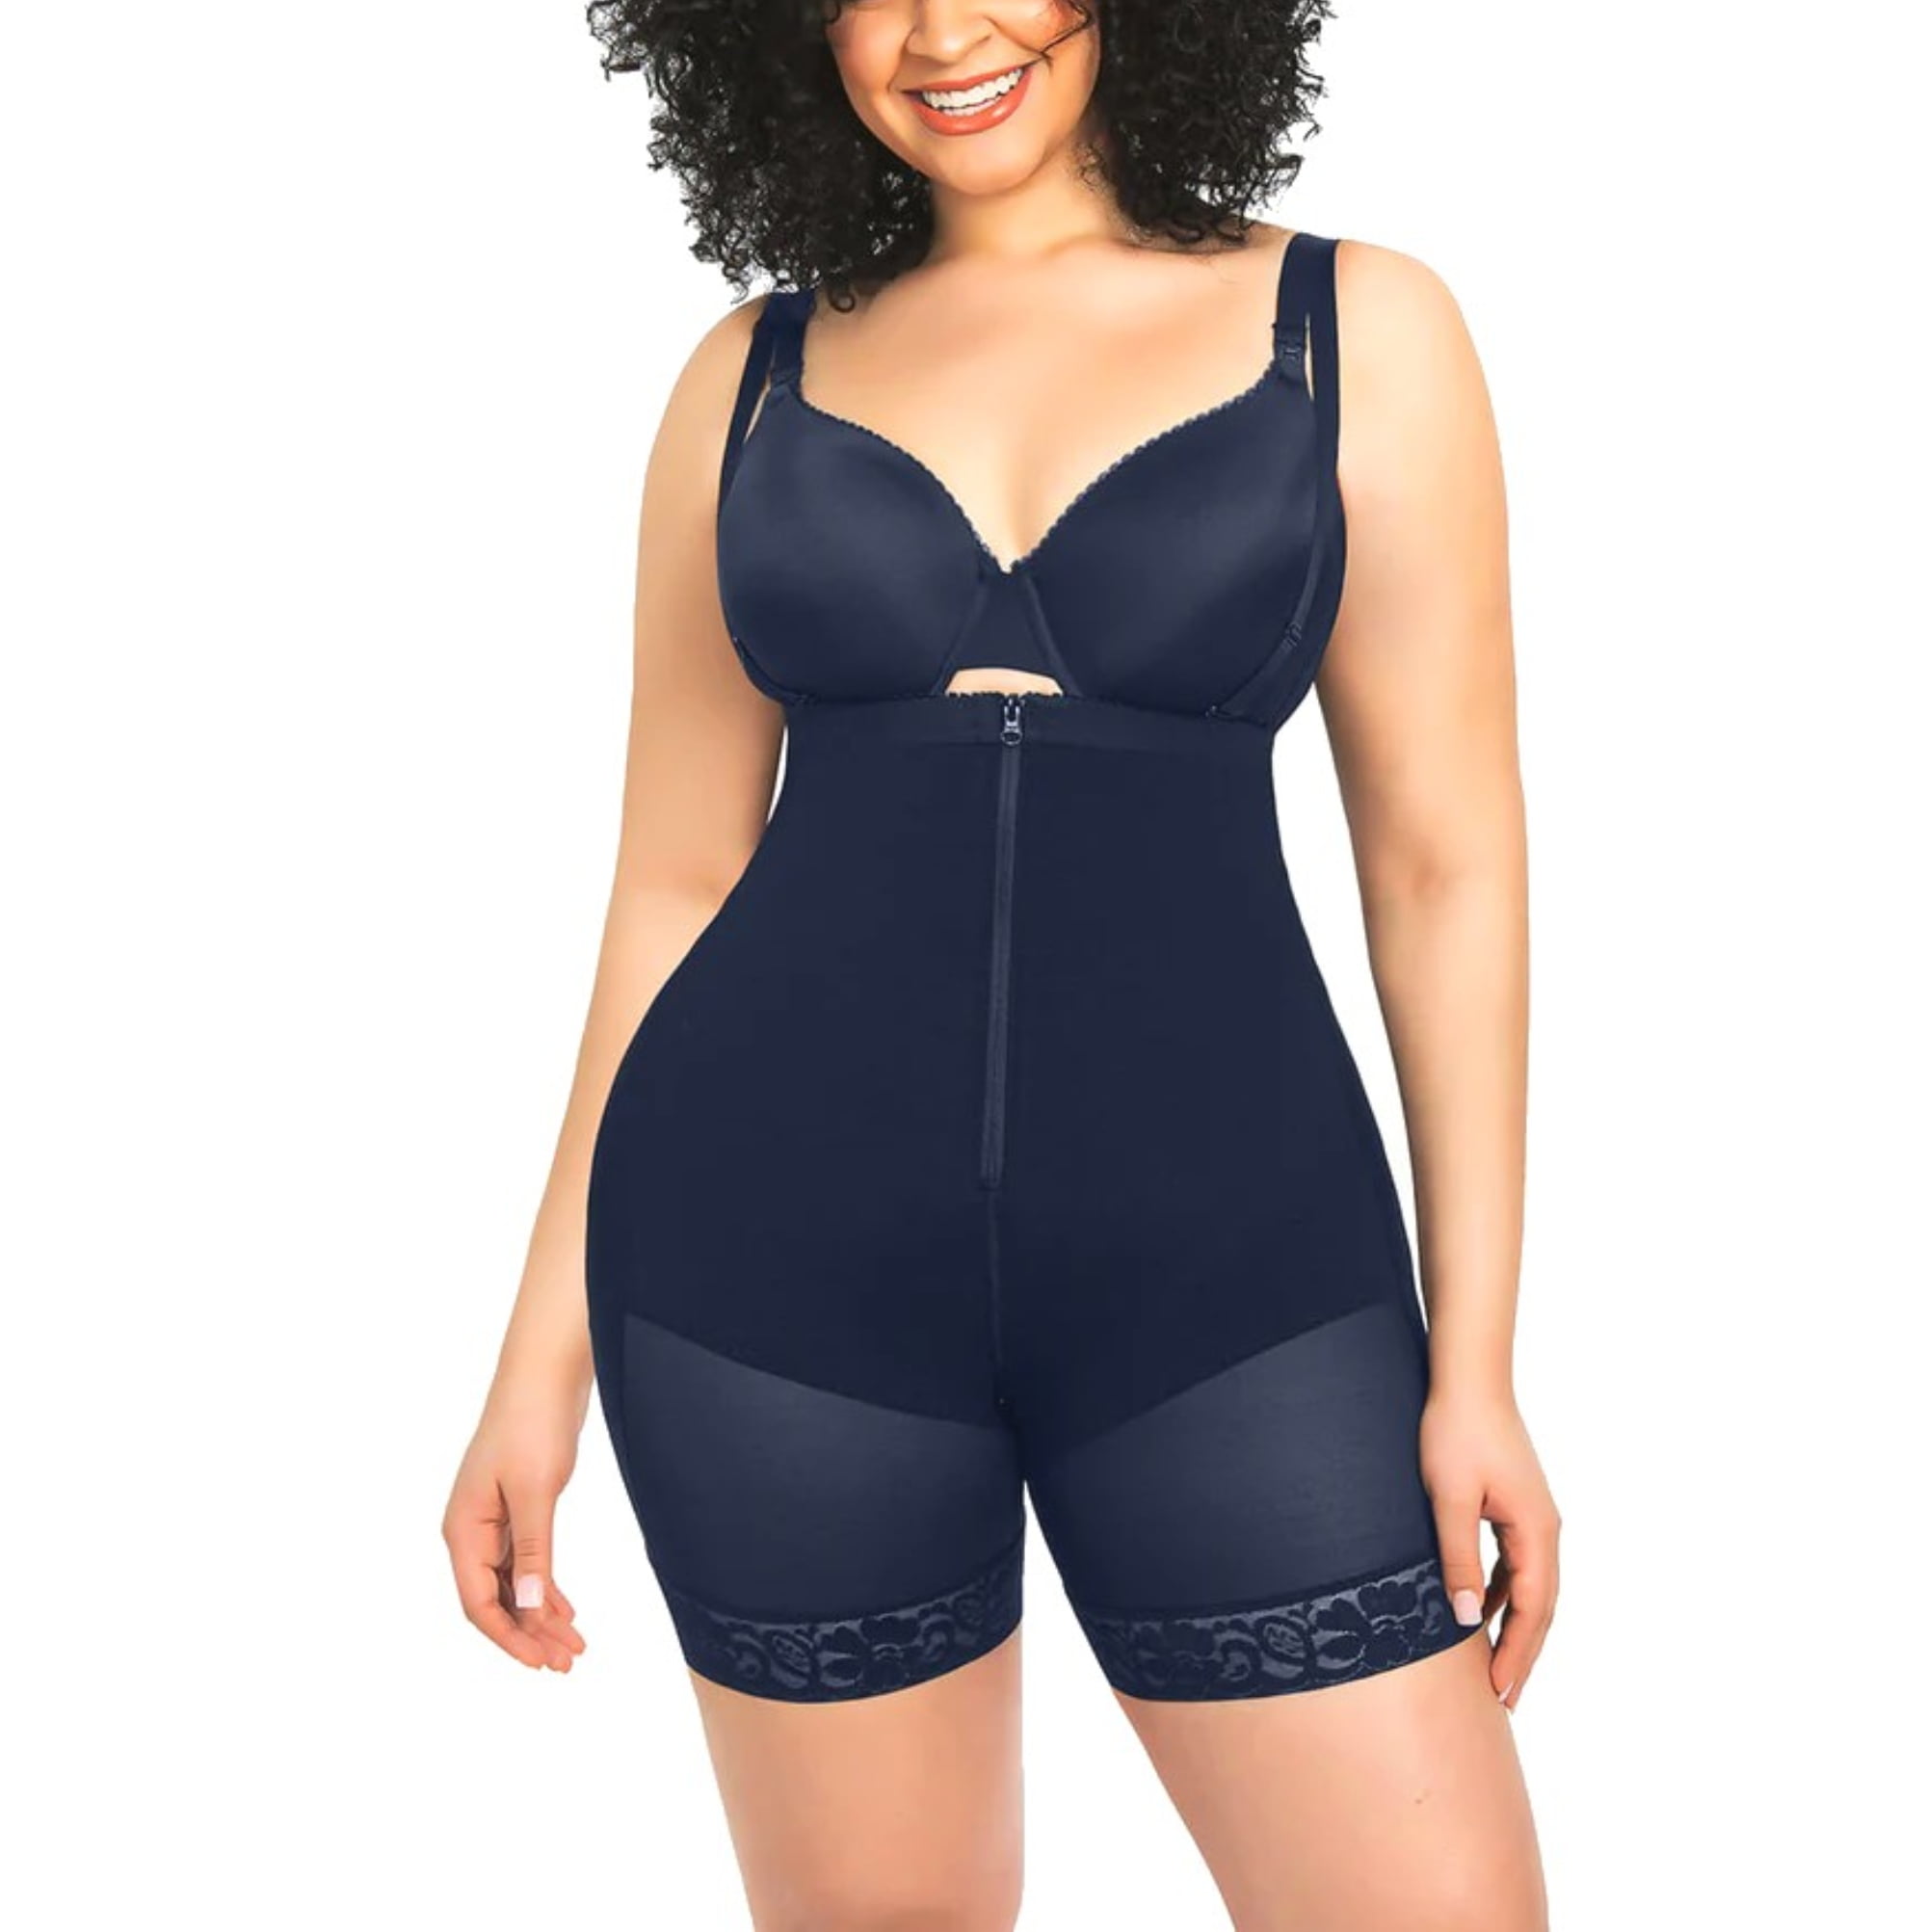  ADJHDFH Plus Size Full Body Shapewear Womens Shapewear Bodysuit  Body Suit Shapers Butt Lift Underwear Women Under 100 Dollar Items Items  Under 5 Dollars For Home Outlet Deals Overstock Clearance 